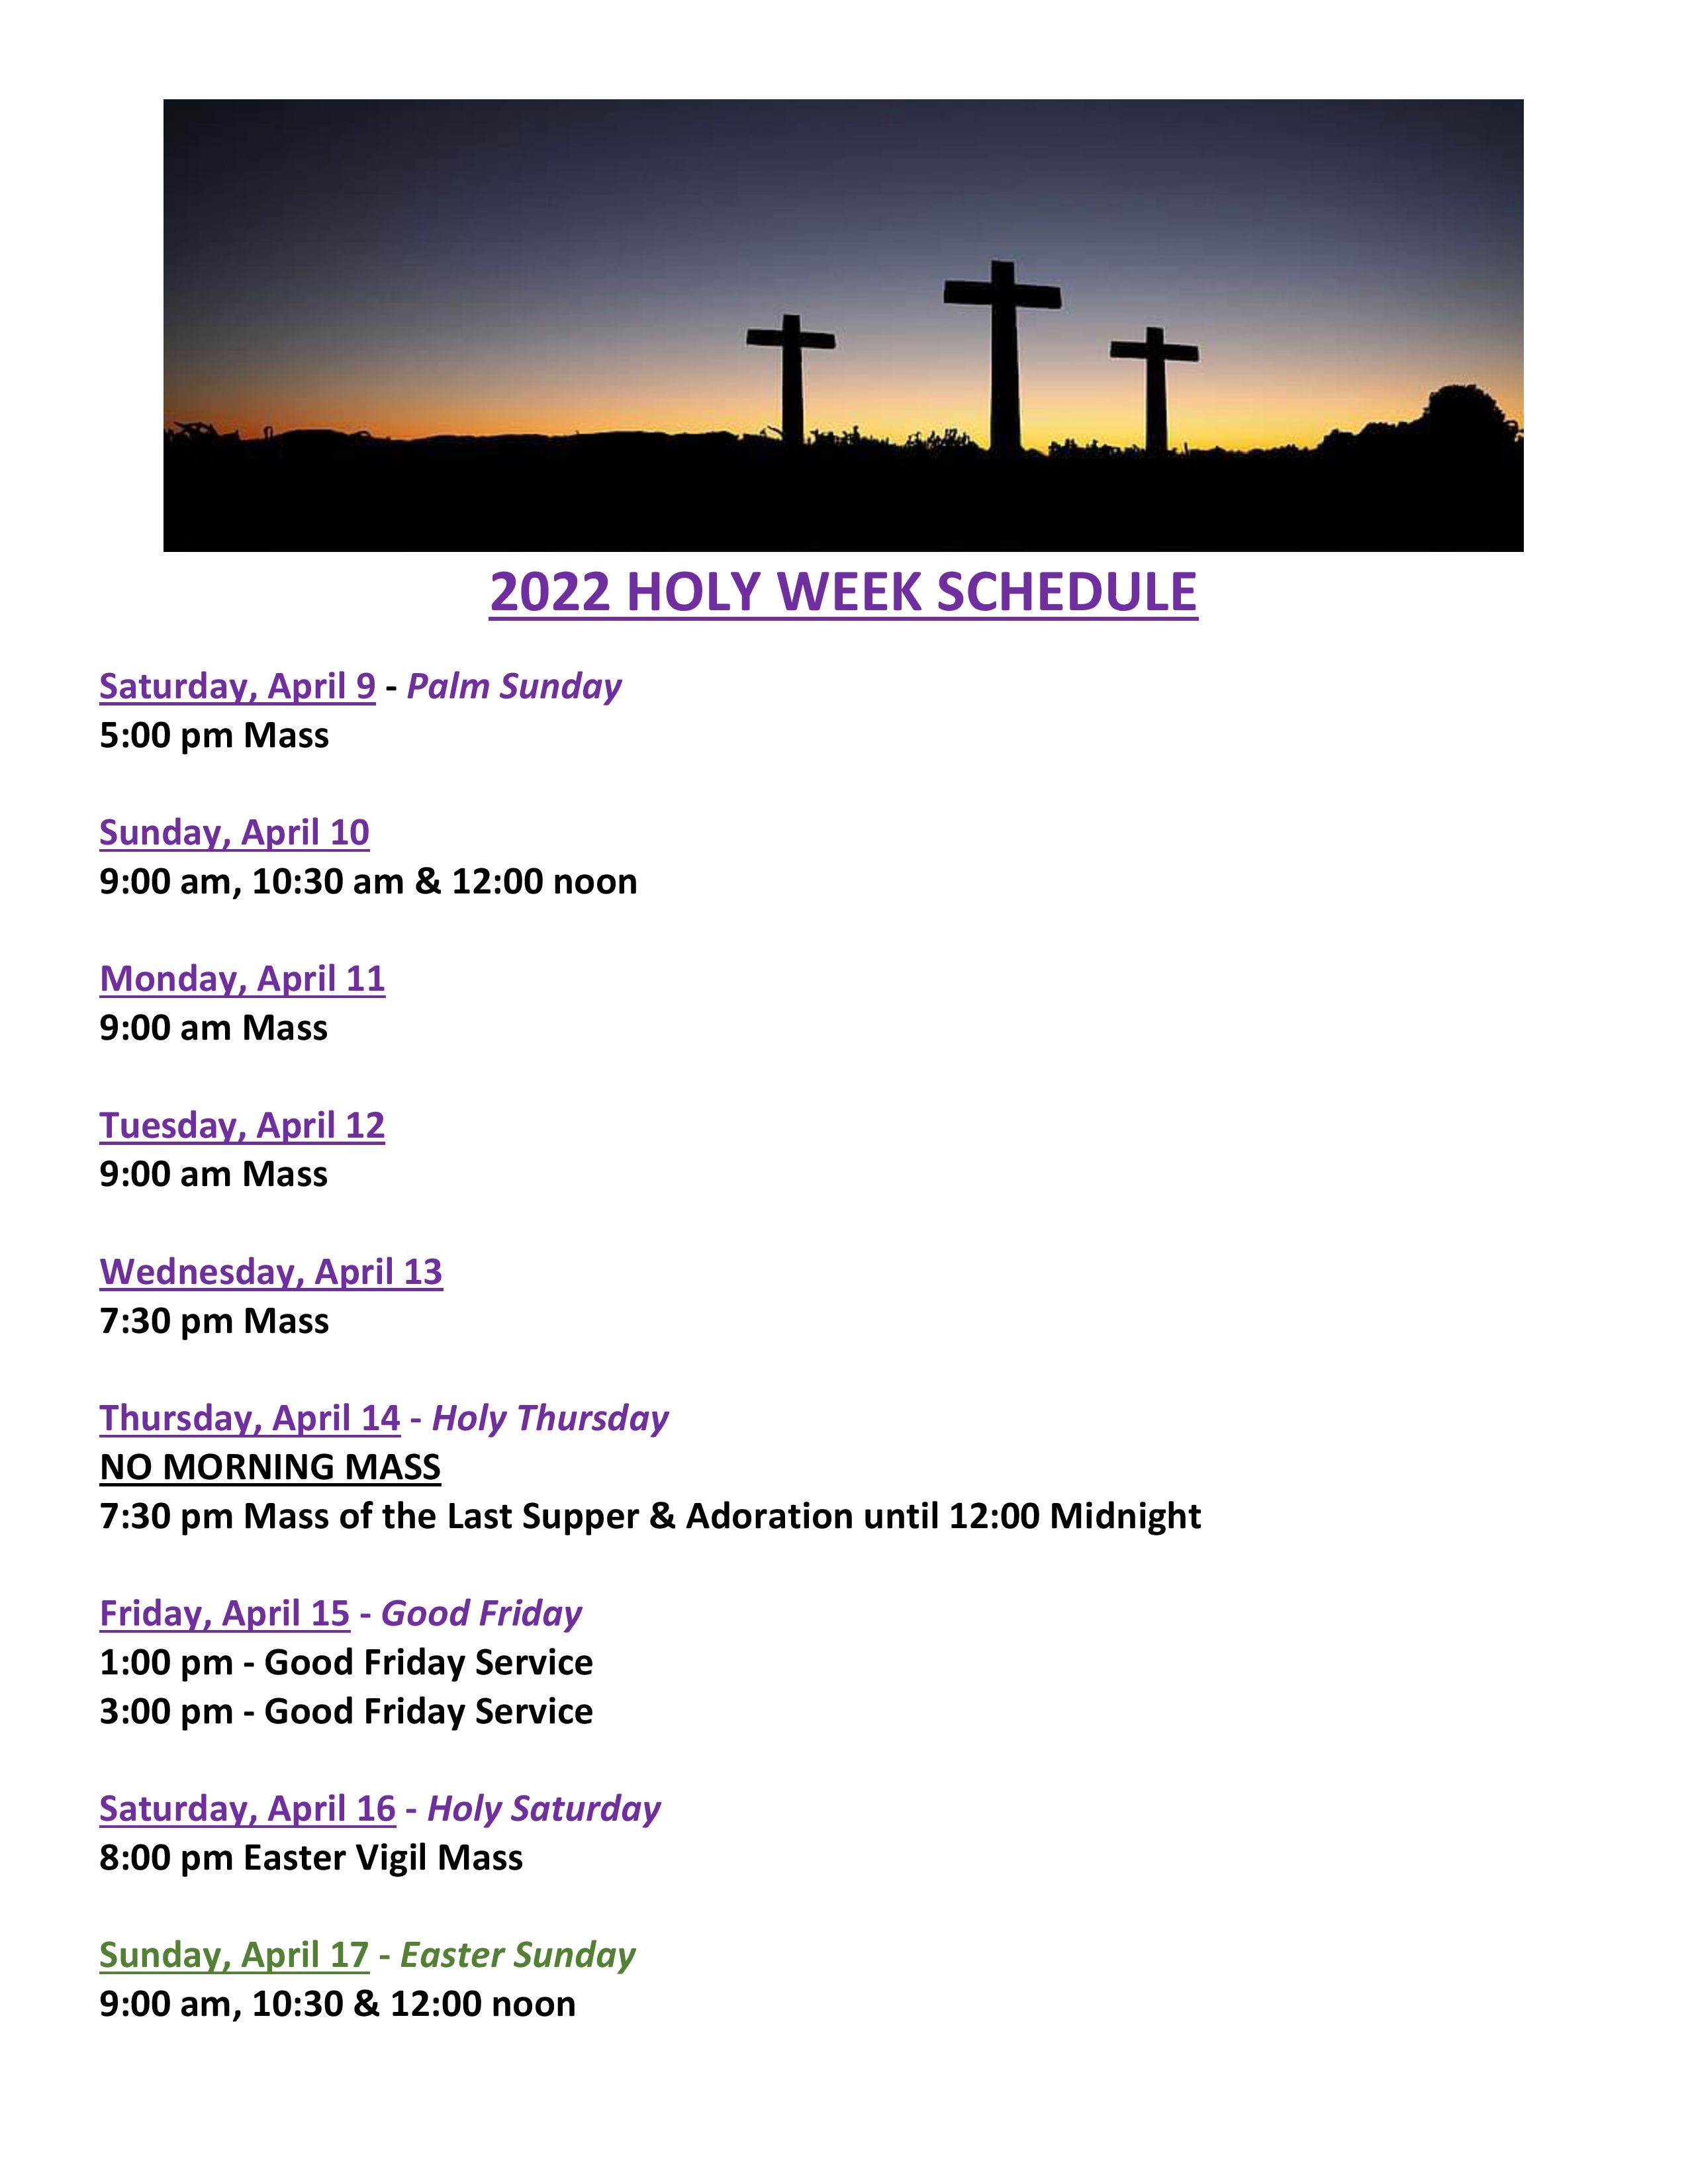 2022 holy week schedule graphic